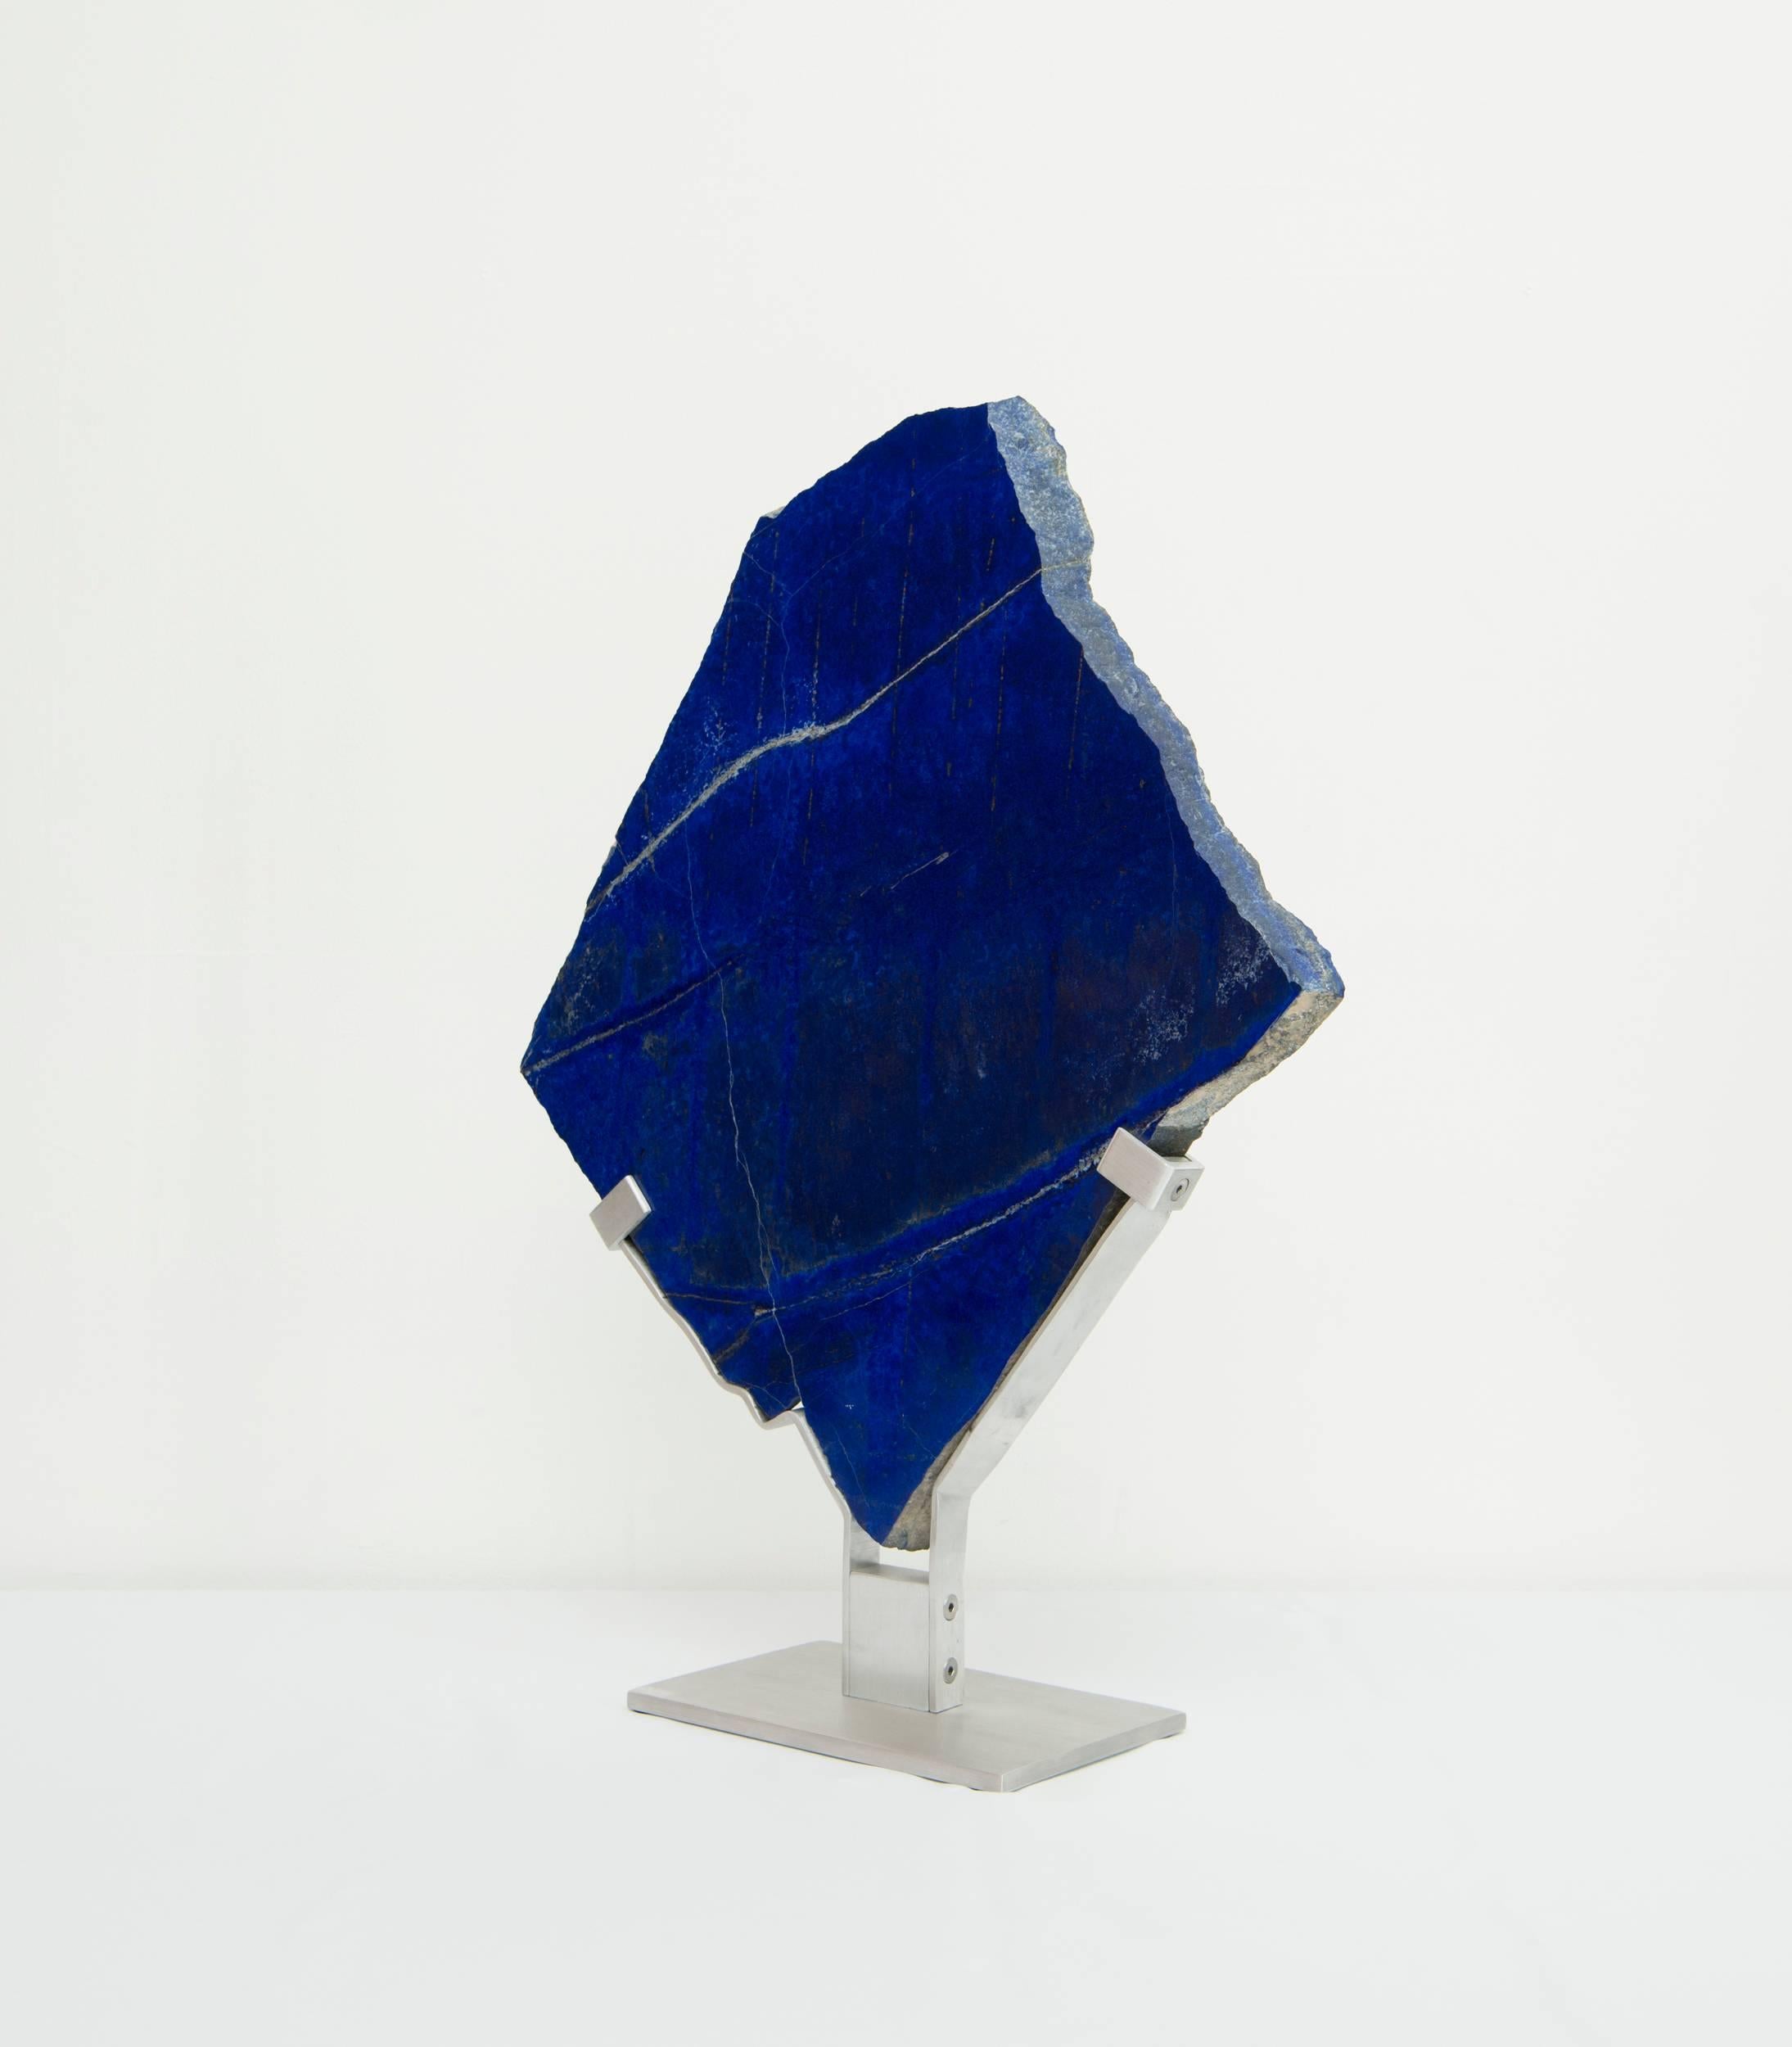 Lapis Lazuli is a deep blue metamorphic rock used as a semi-precious stone that has been prized since antiquity for its intense color. 
It is a combination of lazurite, main constituent, white calcite and pyrite.
The lapis sculpture is 19” x 1” x